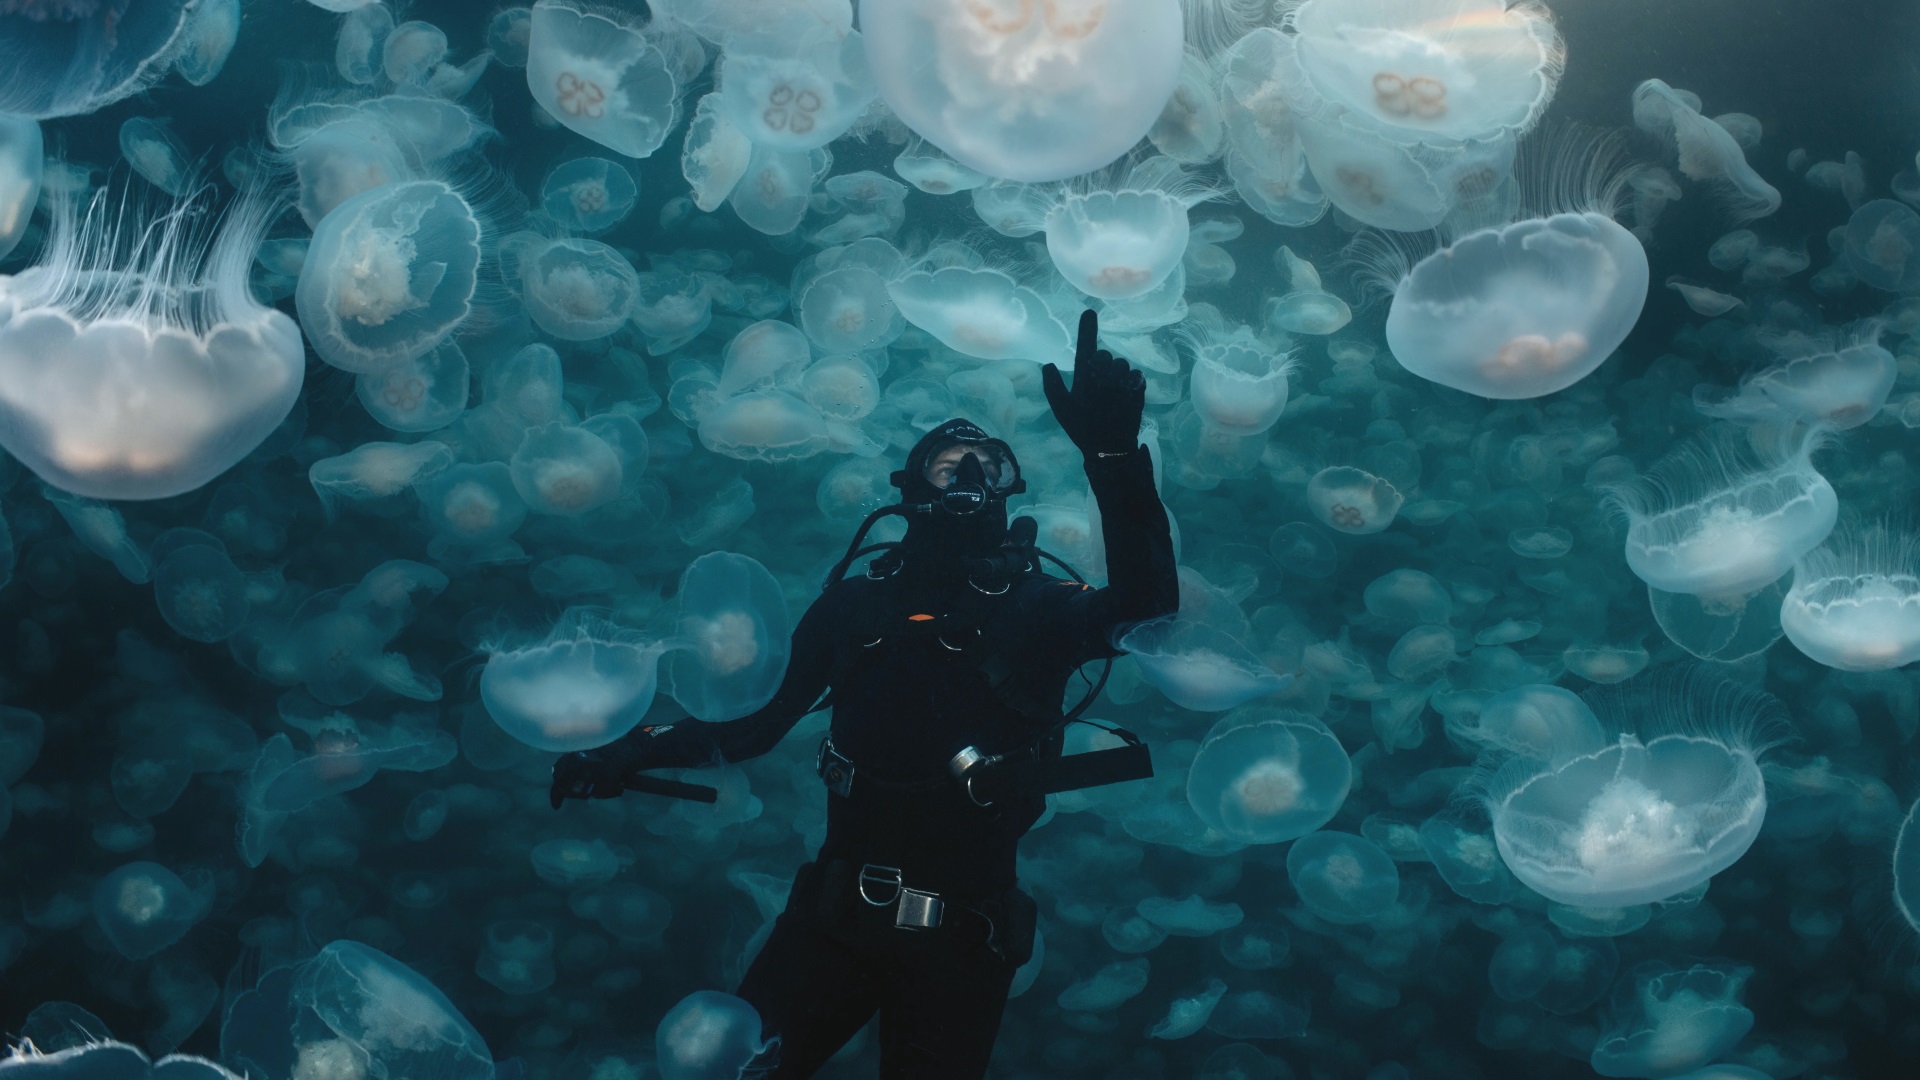 Diver amidst jellyfishes